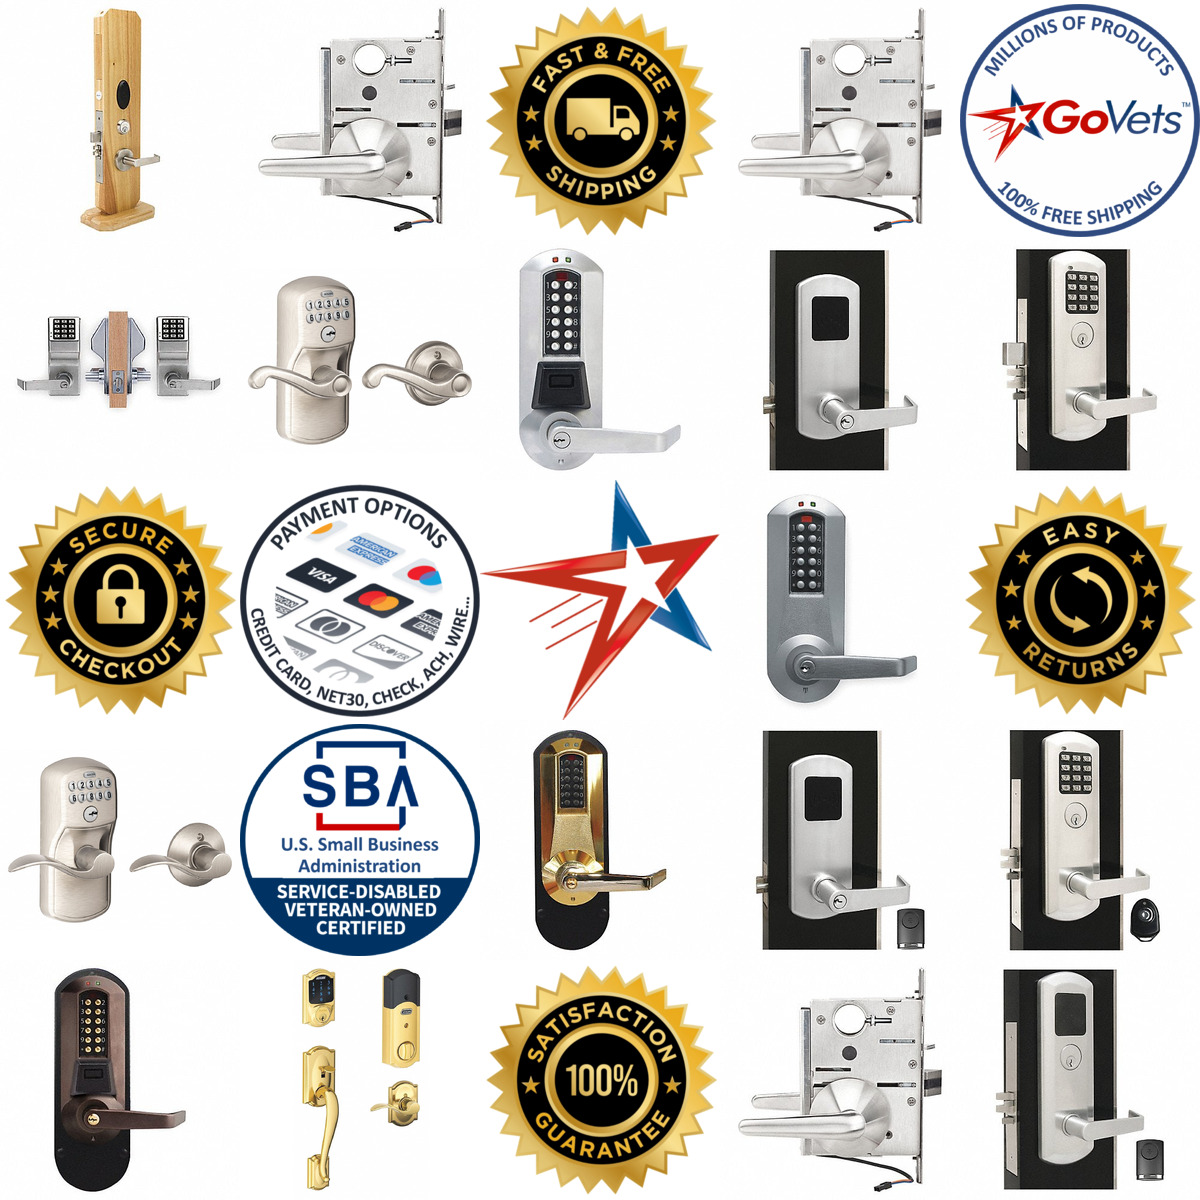 A selection of Electronic Keyless Access Control Locks products on GoVets